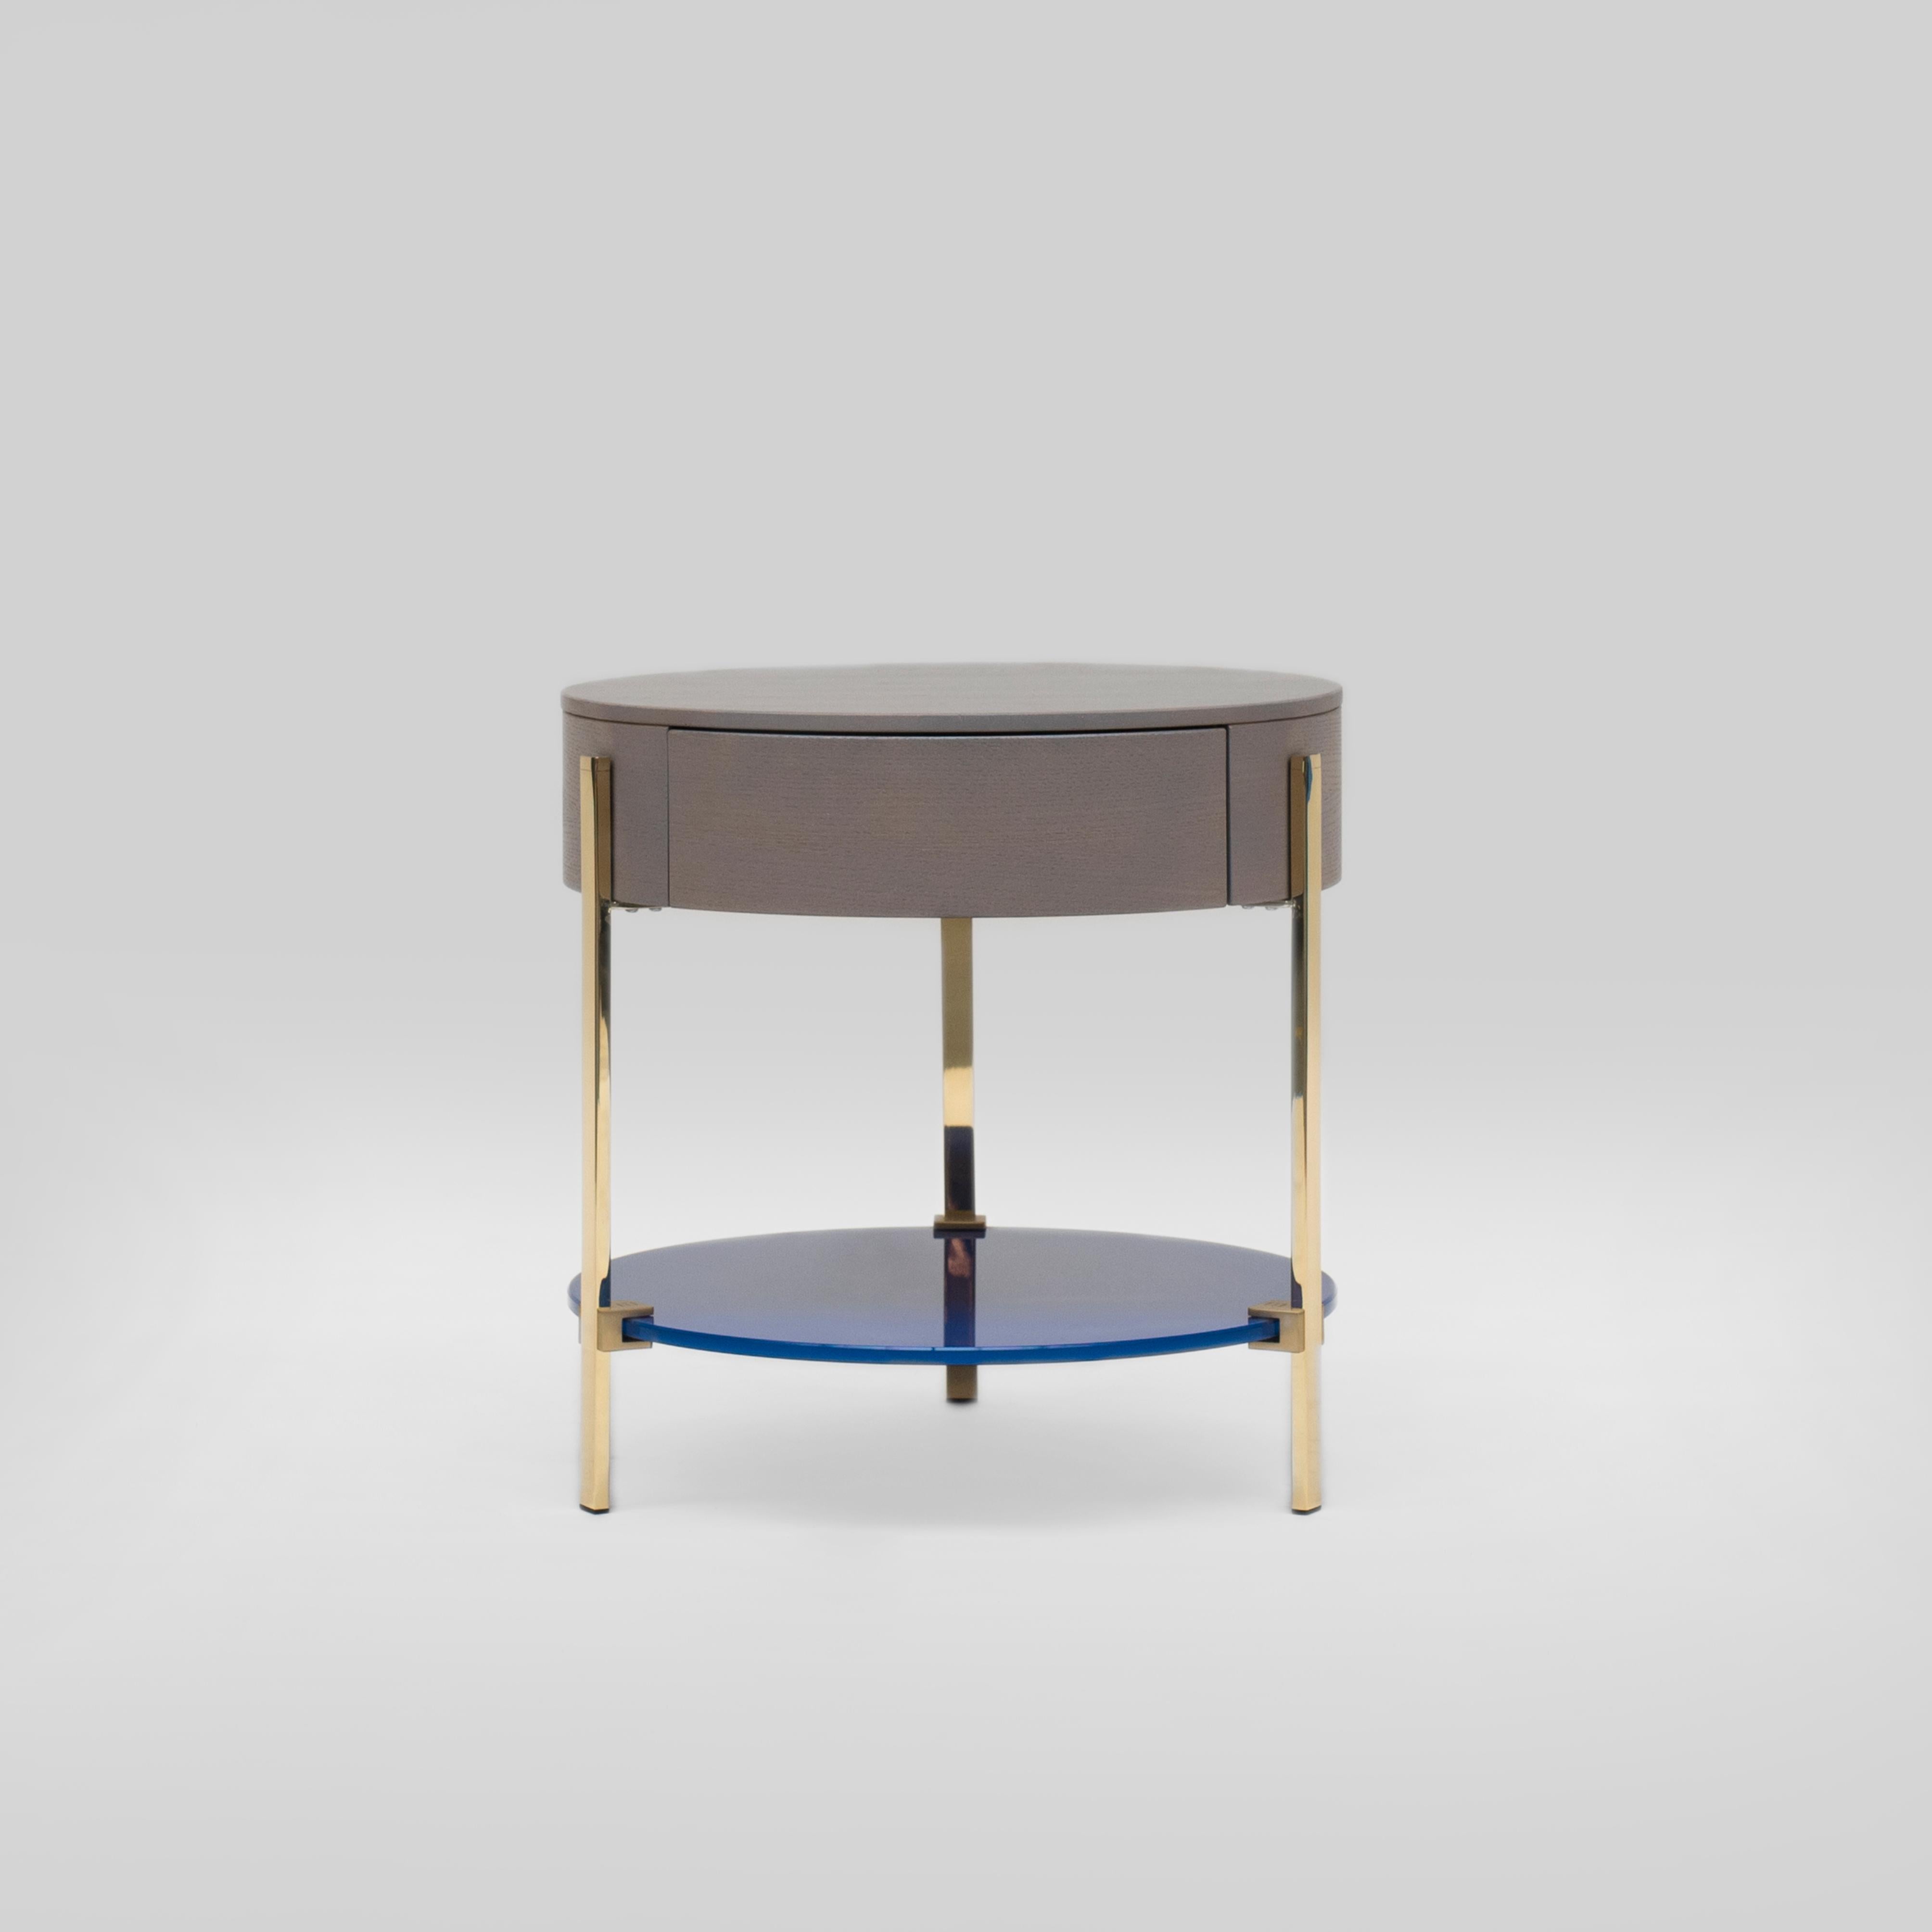 Side table designed by Peter Ghyczy.
Manufactured by Ghyczy (Netherlands)

The T79 is versatile as it is modest. Three stainless steel legs are secured to the glass top by cast metal details. To be ordered in different heights and arranged as